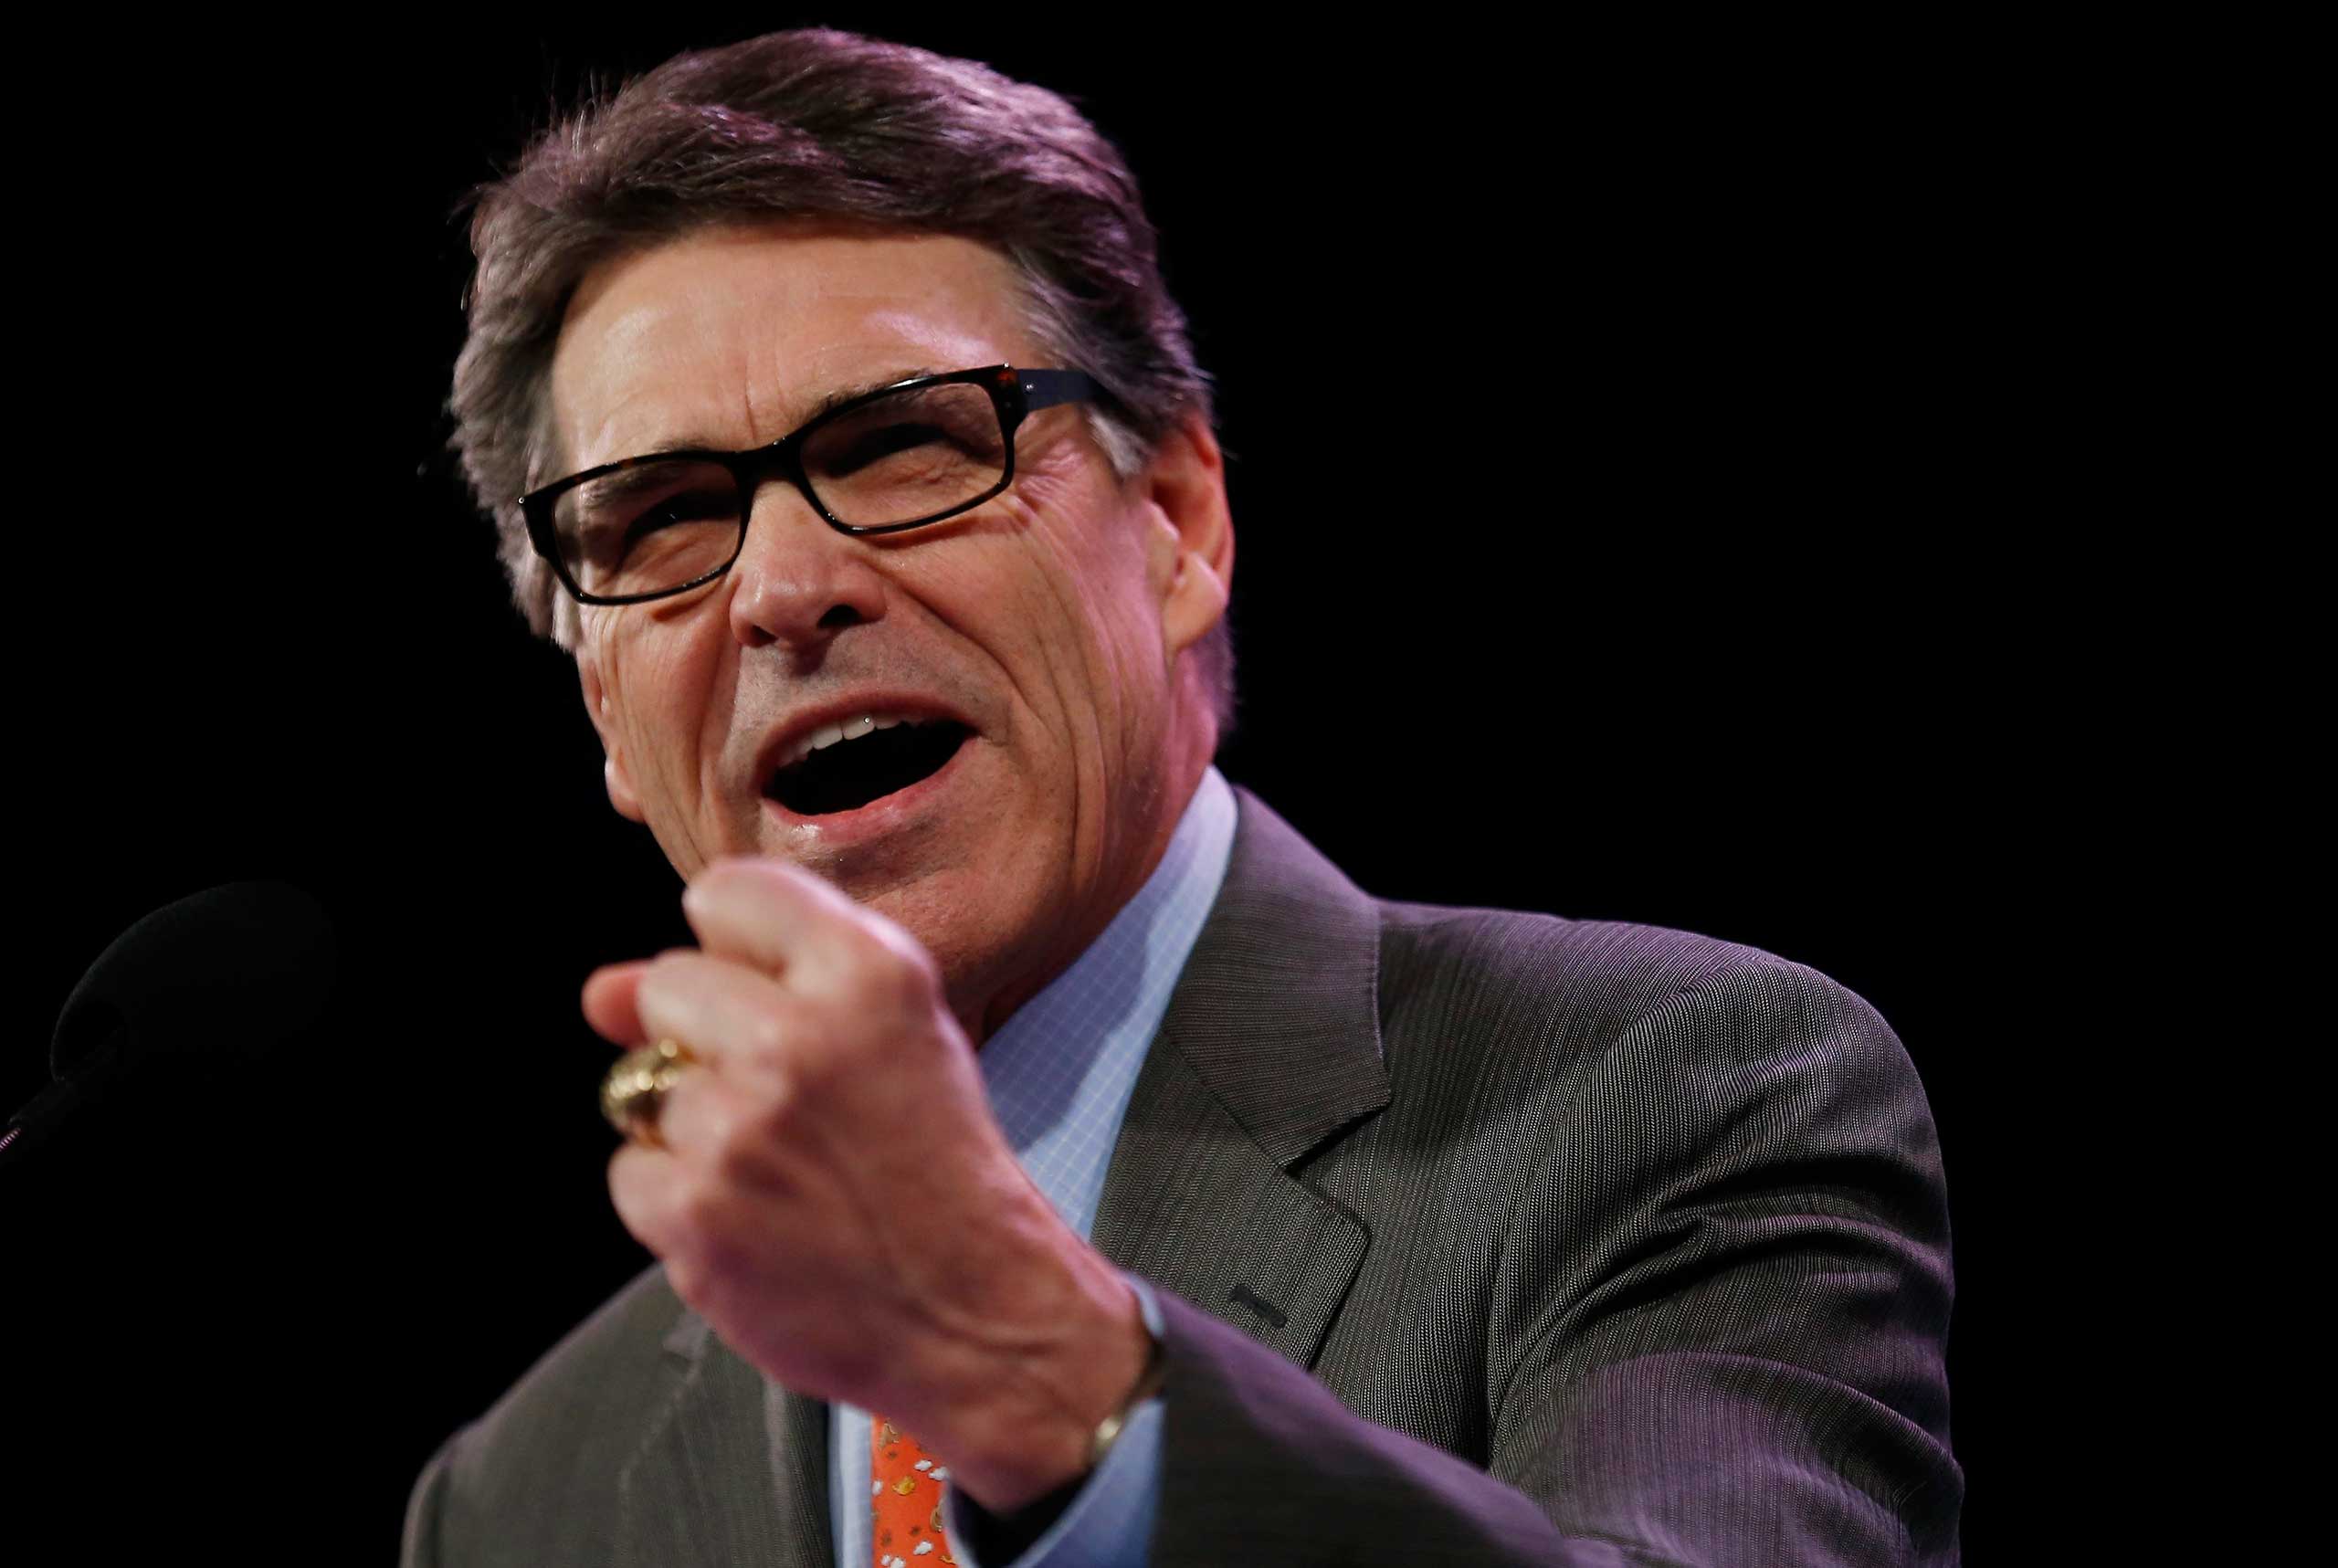 Former Governor of Texas Rick Perry speaks at the Freedom Summit in Des Moines, Iowa on Jan. 24, 2015.